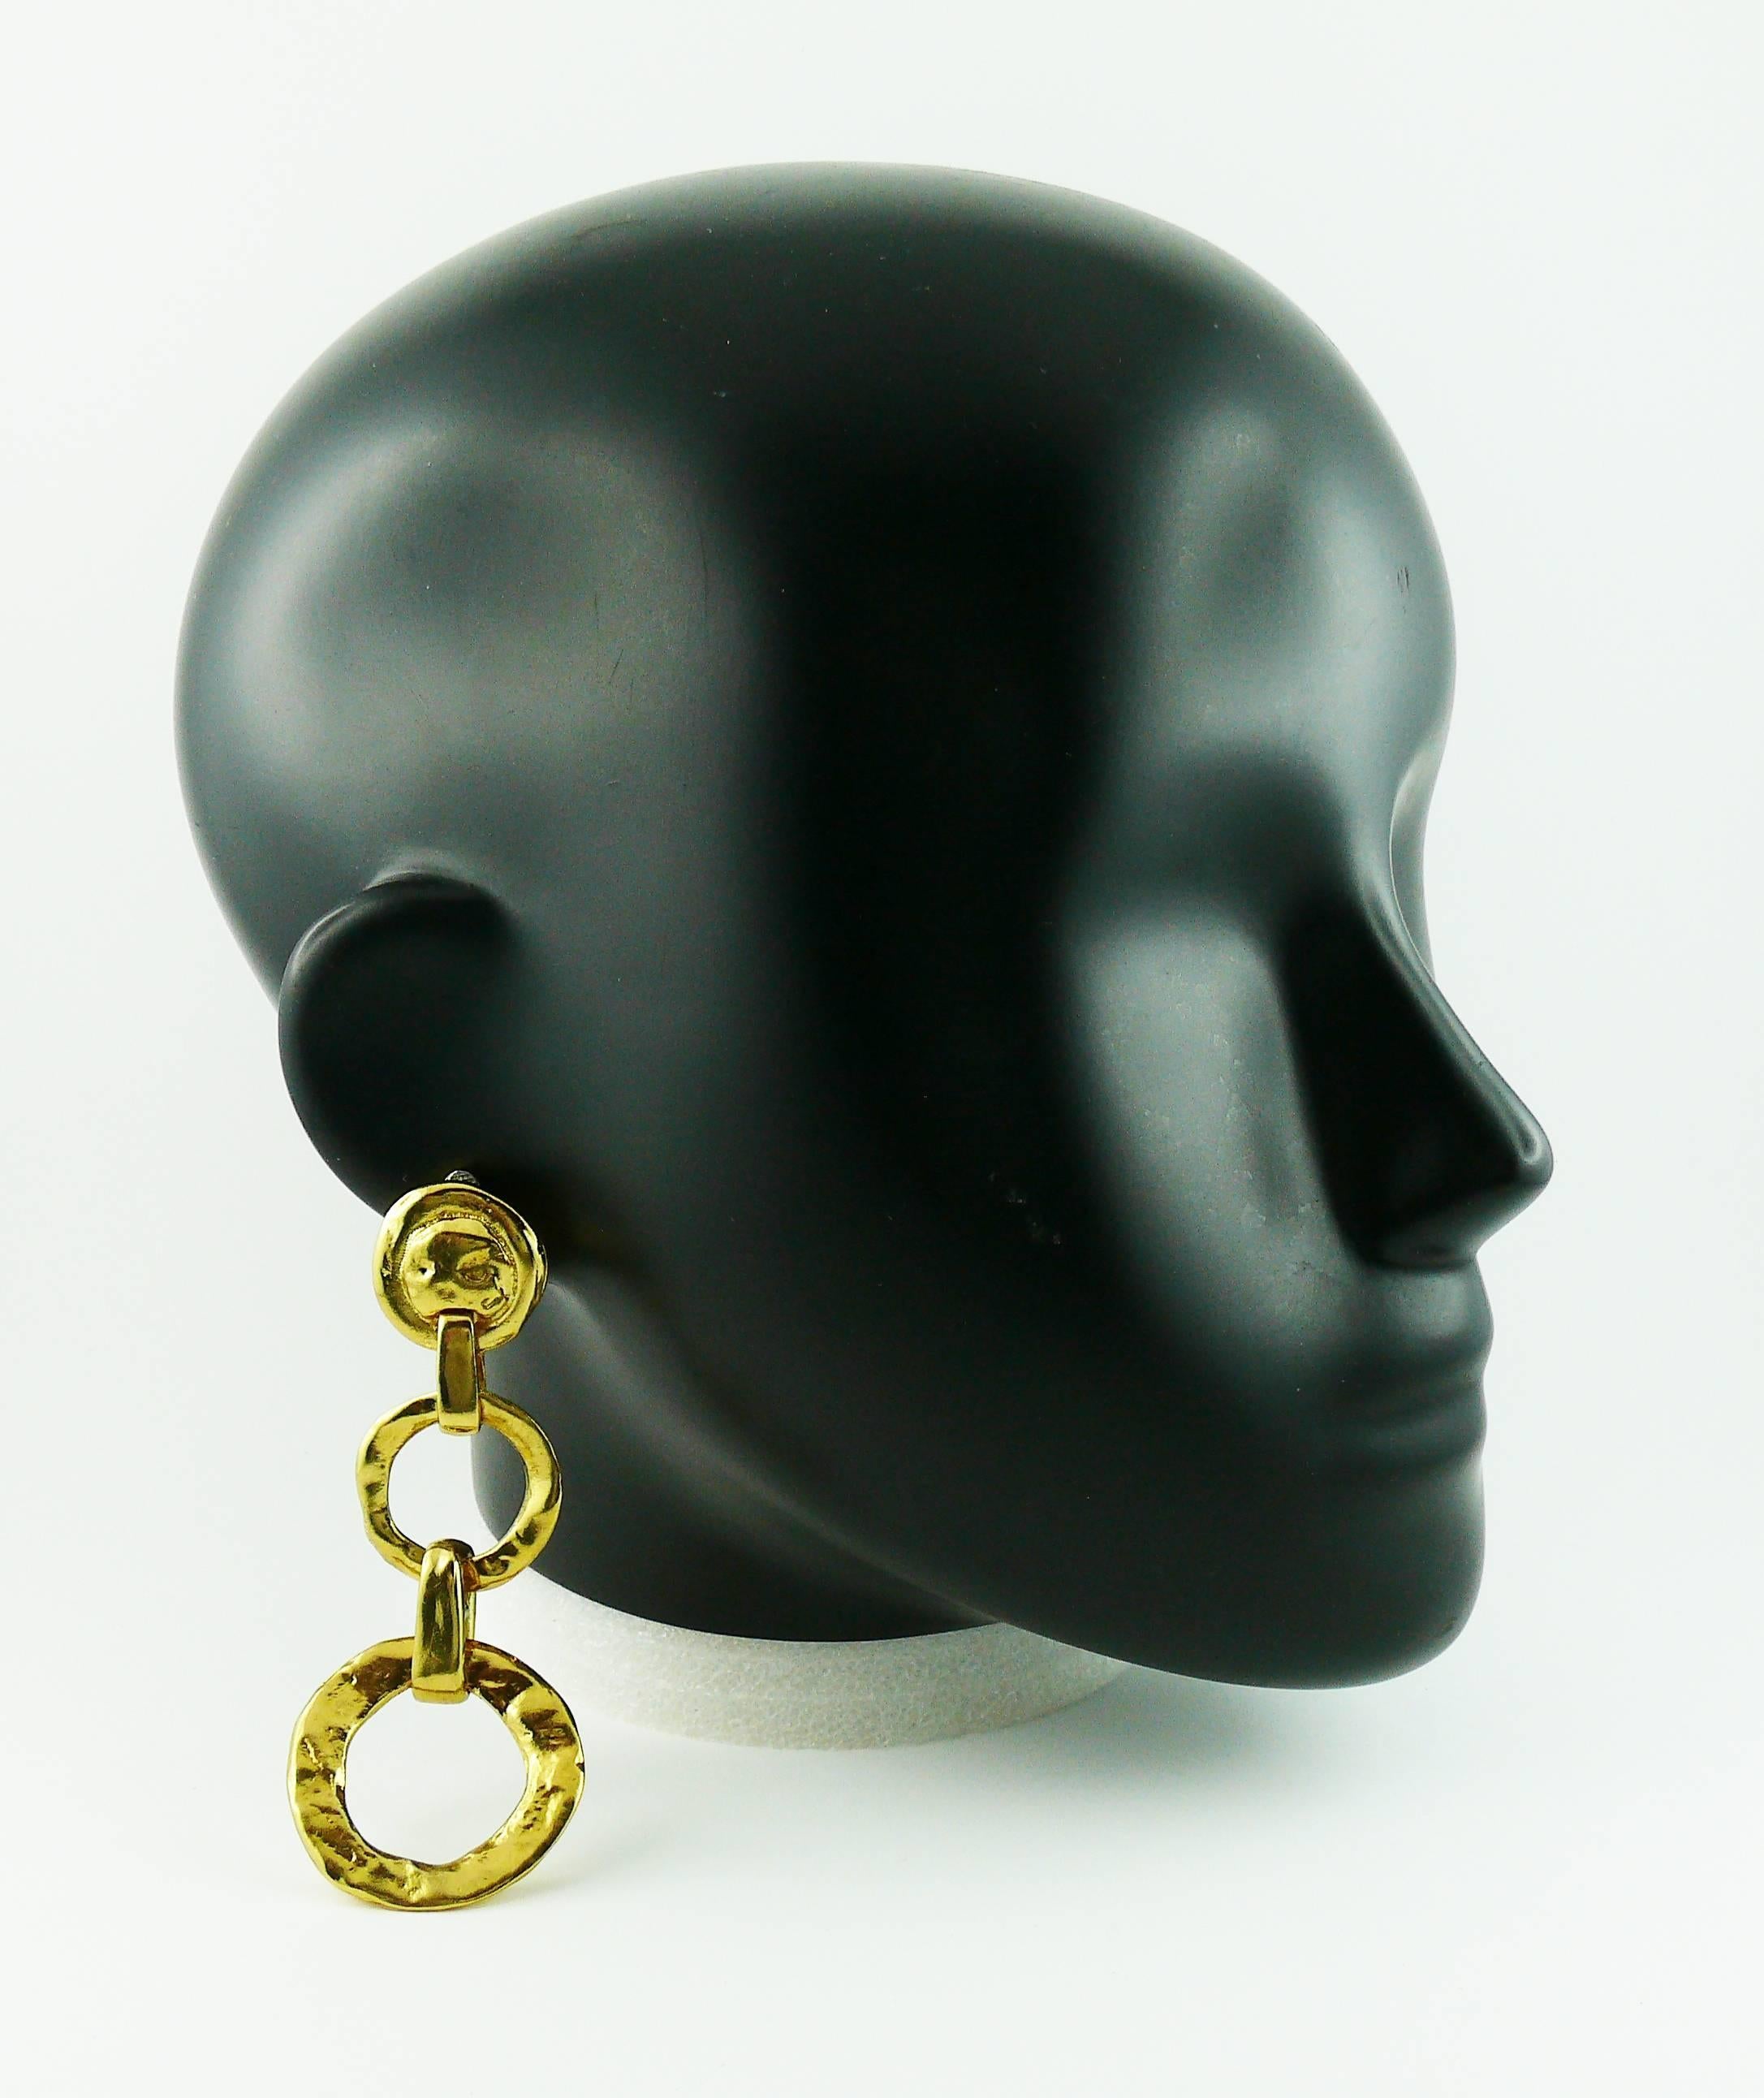 YVES SAINT LAURENT vintage gold tone dangling earrings (clip-on) featuring two textured hoops falling from an abstract "face mouth".

Embossed YSL Made in France.

Indicative measurements : length approx. 9 cm (3.54 inches) / maximum width